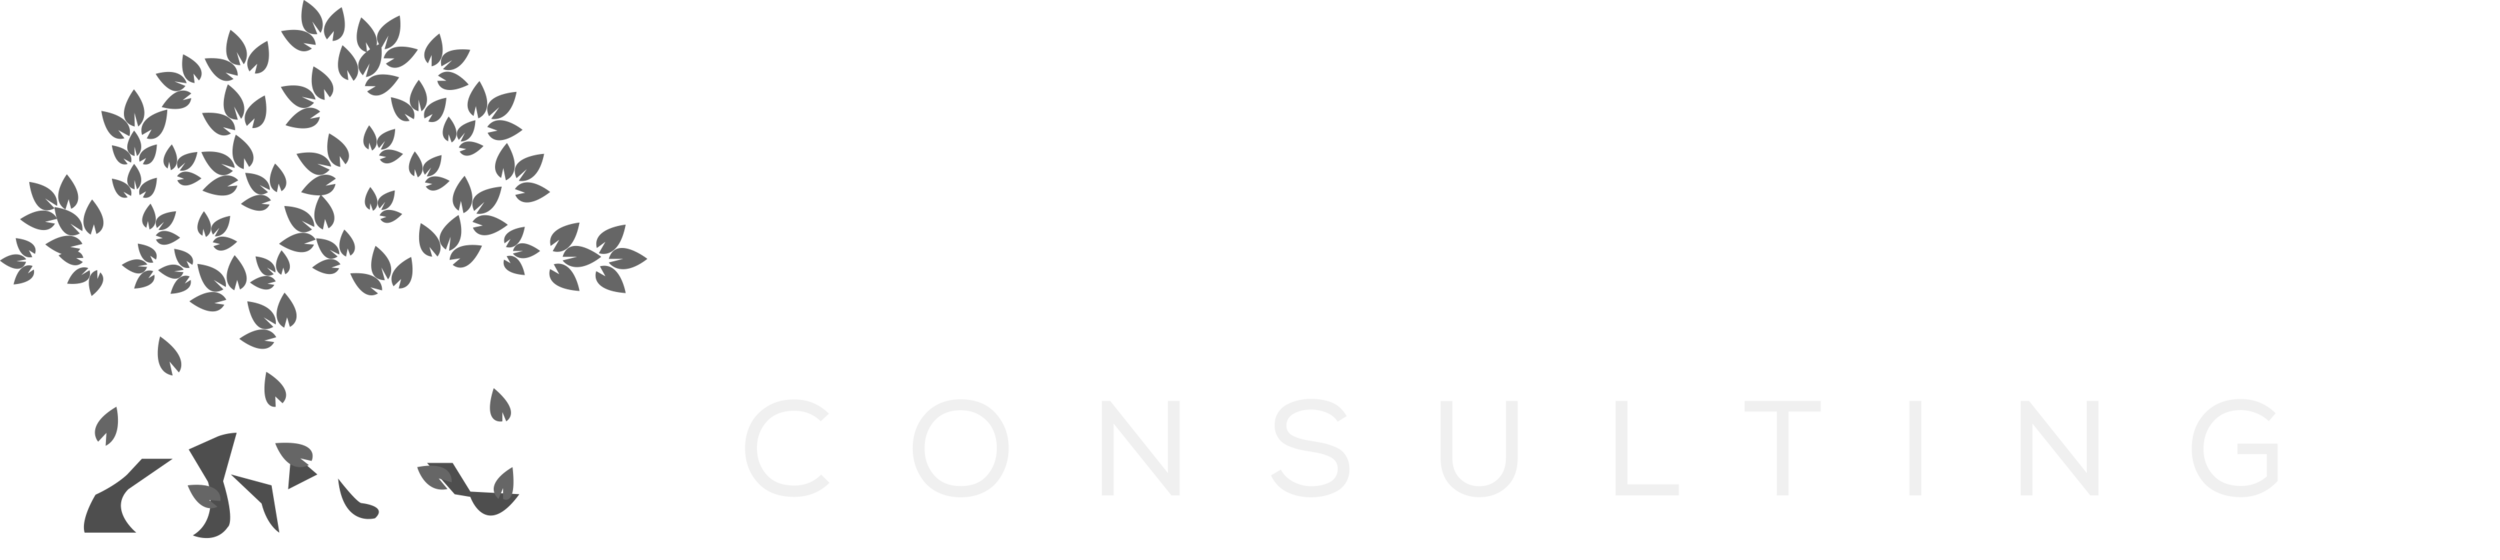 Woodreeve Consulting